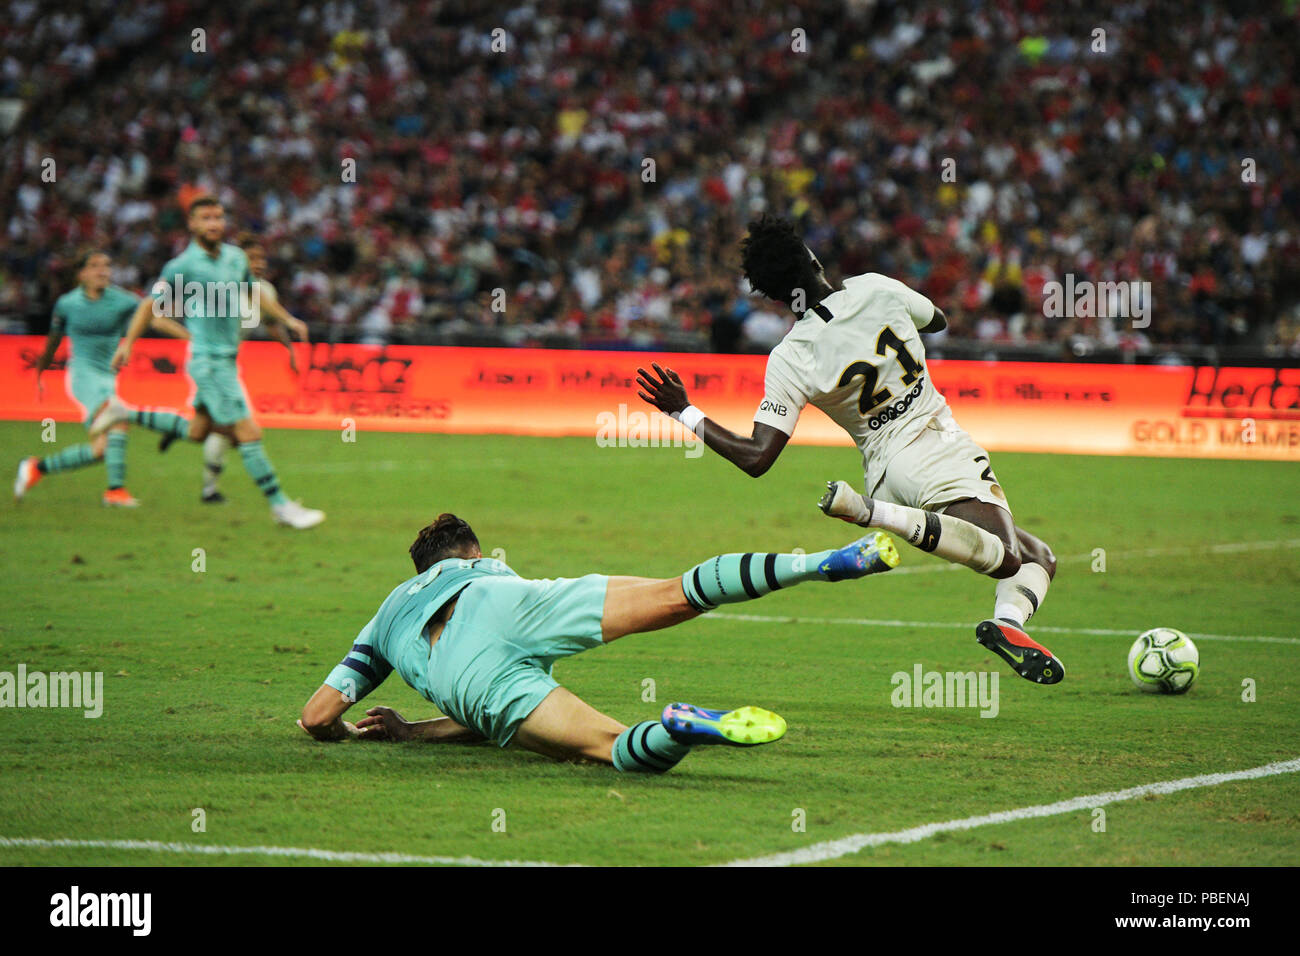 Singapore. 28th July, 2018. Arsenal's Sead Kolasinac (front L) tackles Paris Saint-Germain's Timothy Weah down during the International Champions Cup soccer match held in Singapore on July 28, 2018. Credit: Then Chih Wey/Xinhua/Alamy Live News Stock Photo